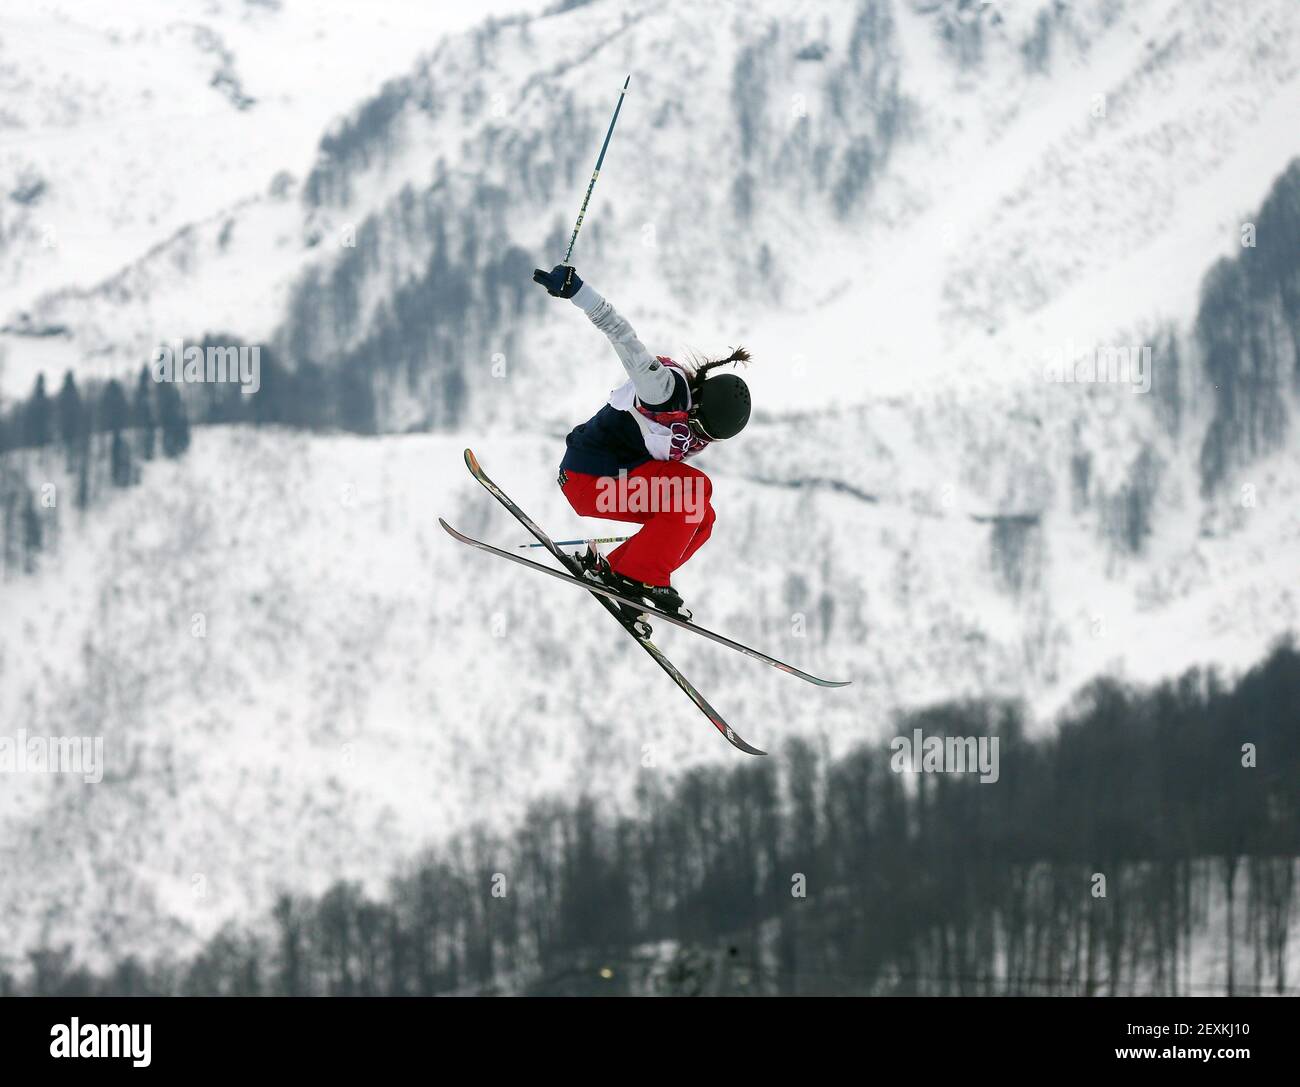 Keri Herman, of the USA, competes in the ladies' ski slopestyle at the Rosa Khutor Extreme Park during the Winter Olympics in Sochi, Russia, Tuesday, Feb. 11, 2014. (Photo by Brian Cassella/Chicago Tribune/MCT/Sipa USA) Stock Photo